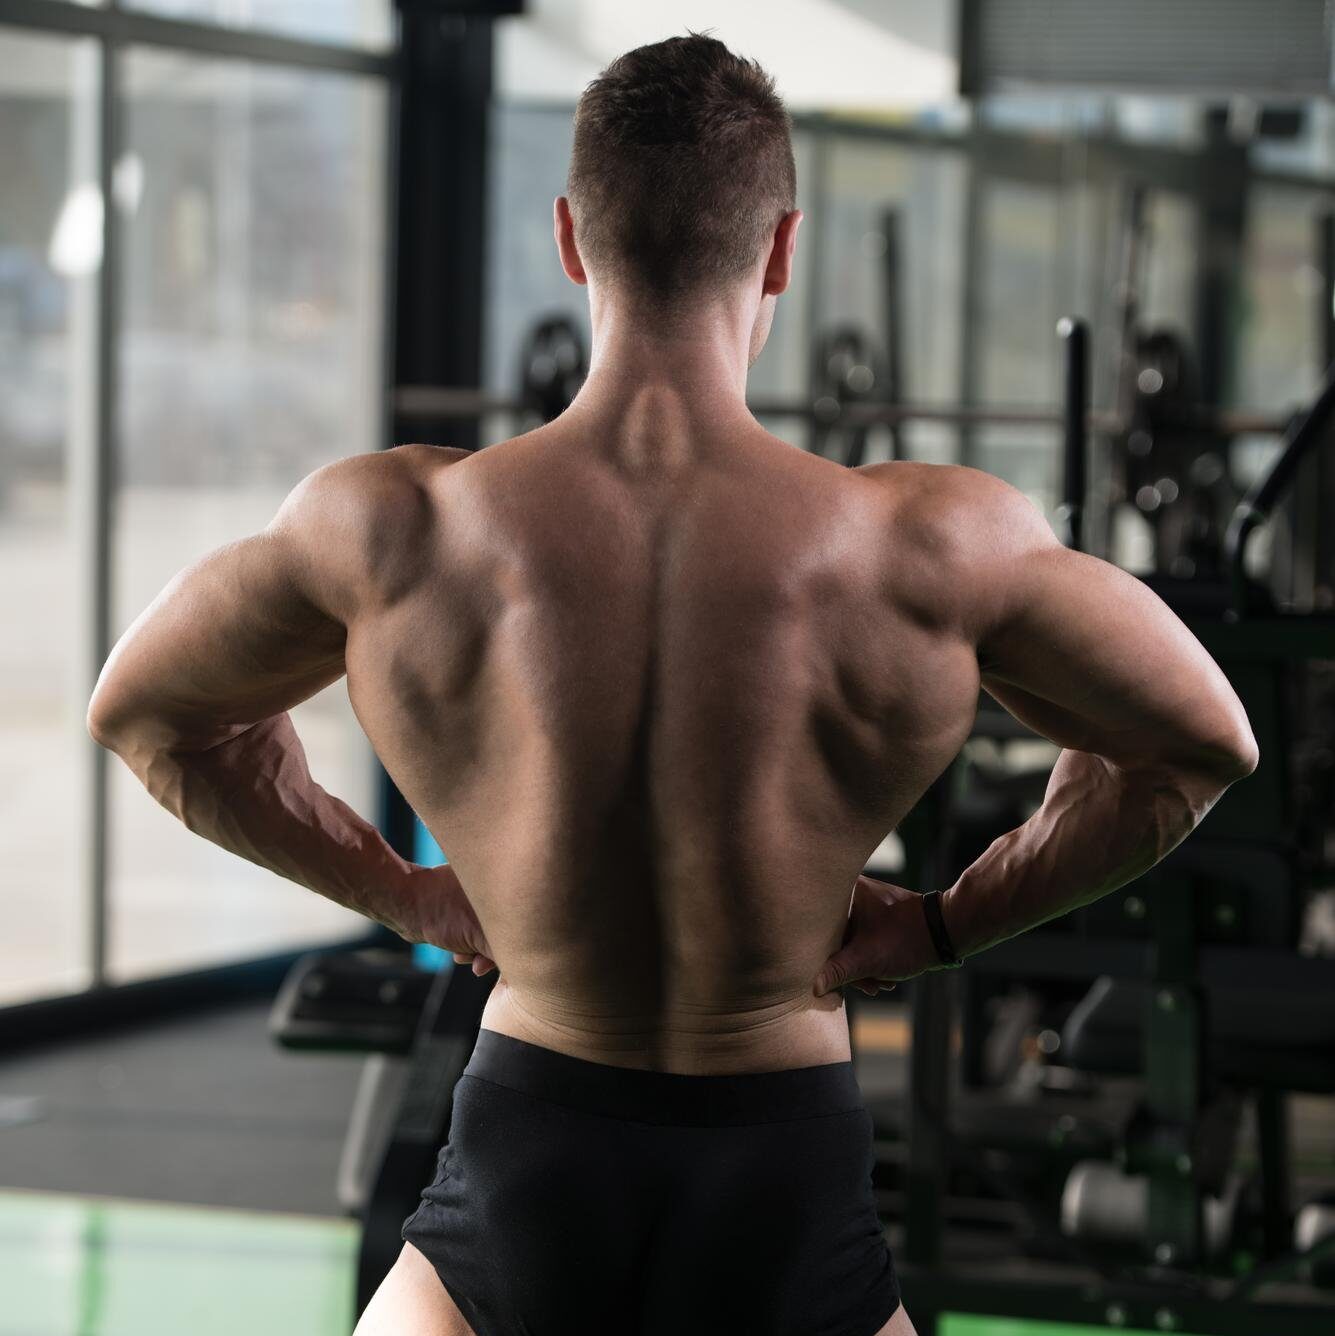 10 Barbell Back Exercises To Build Muscle And Strength